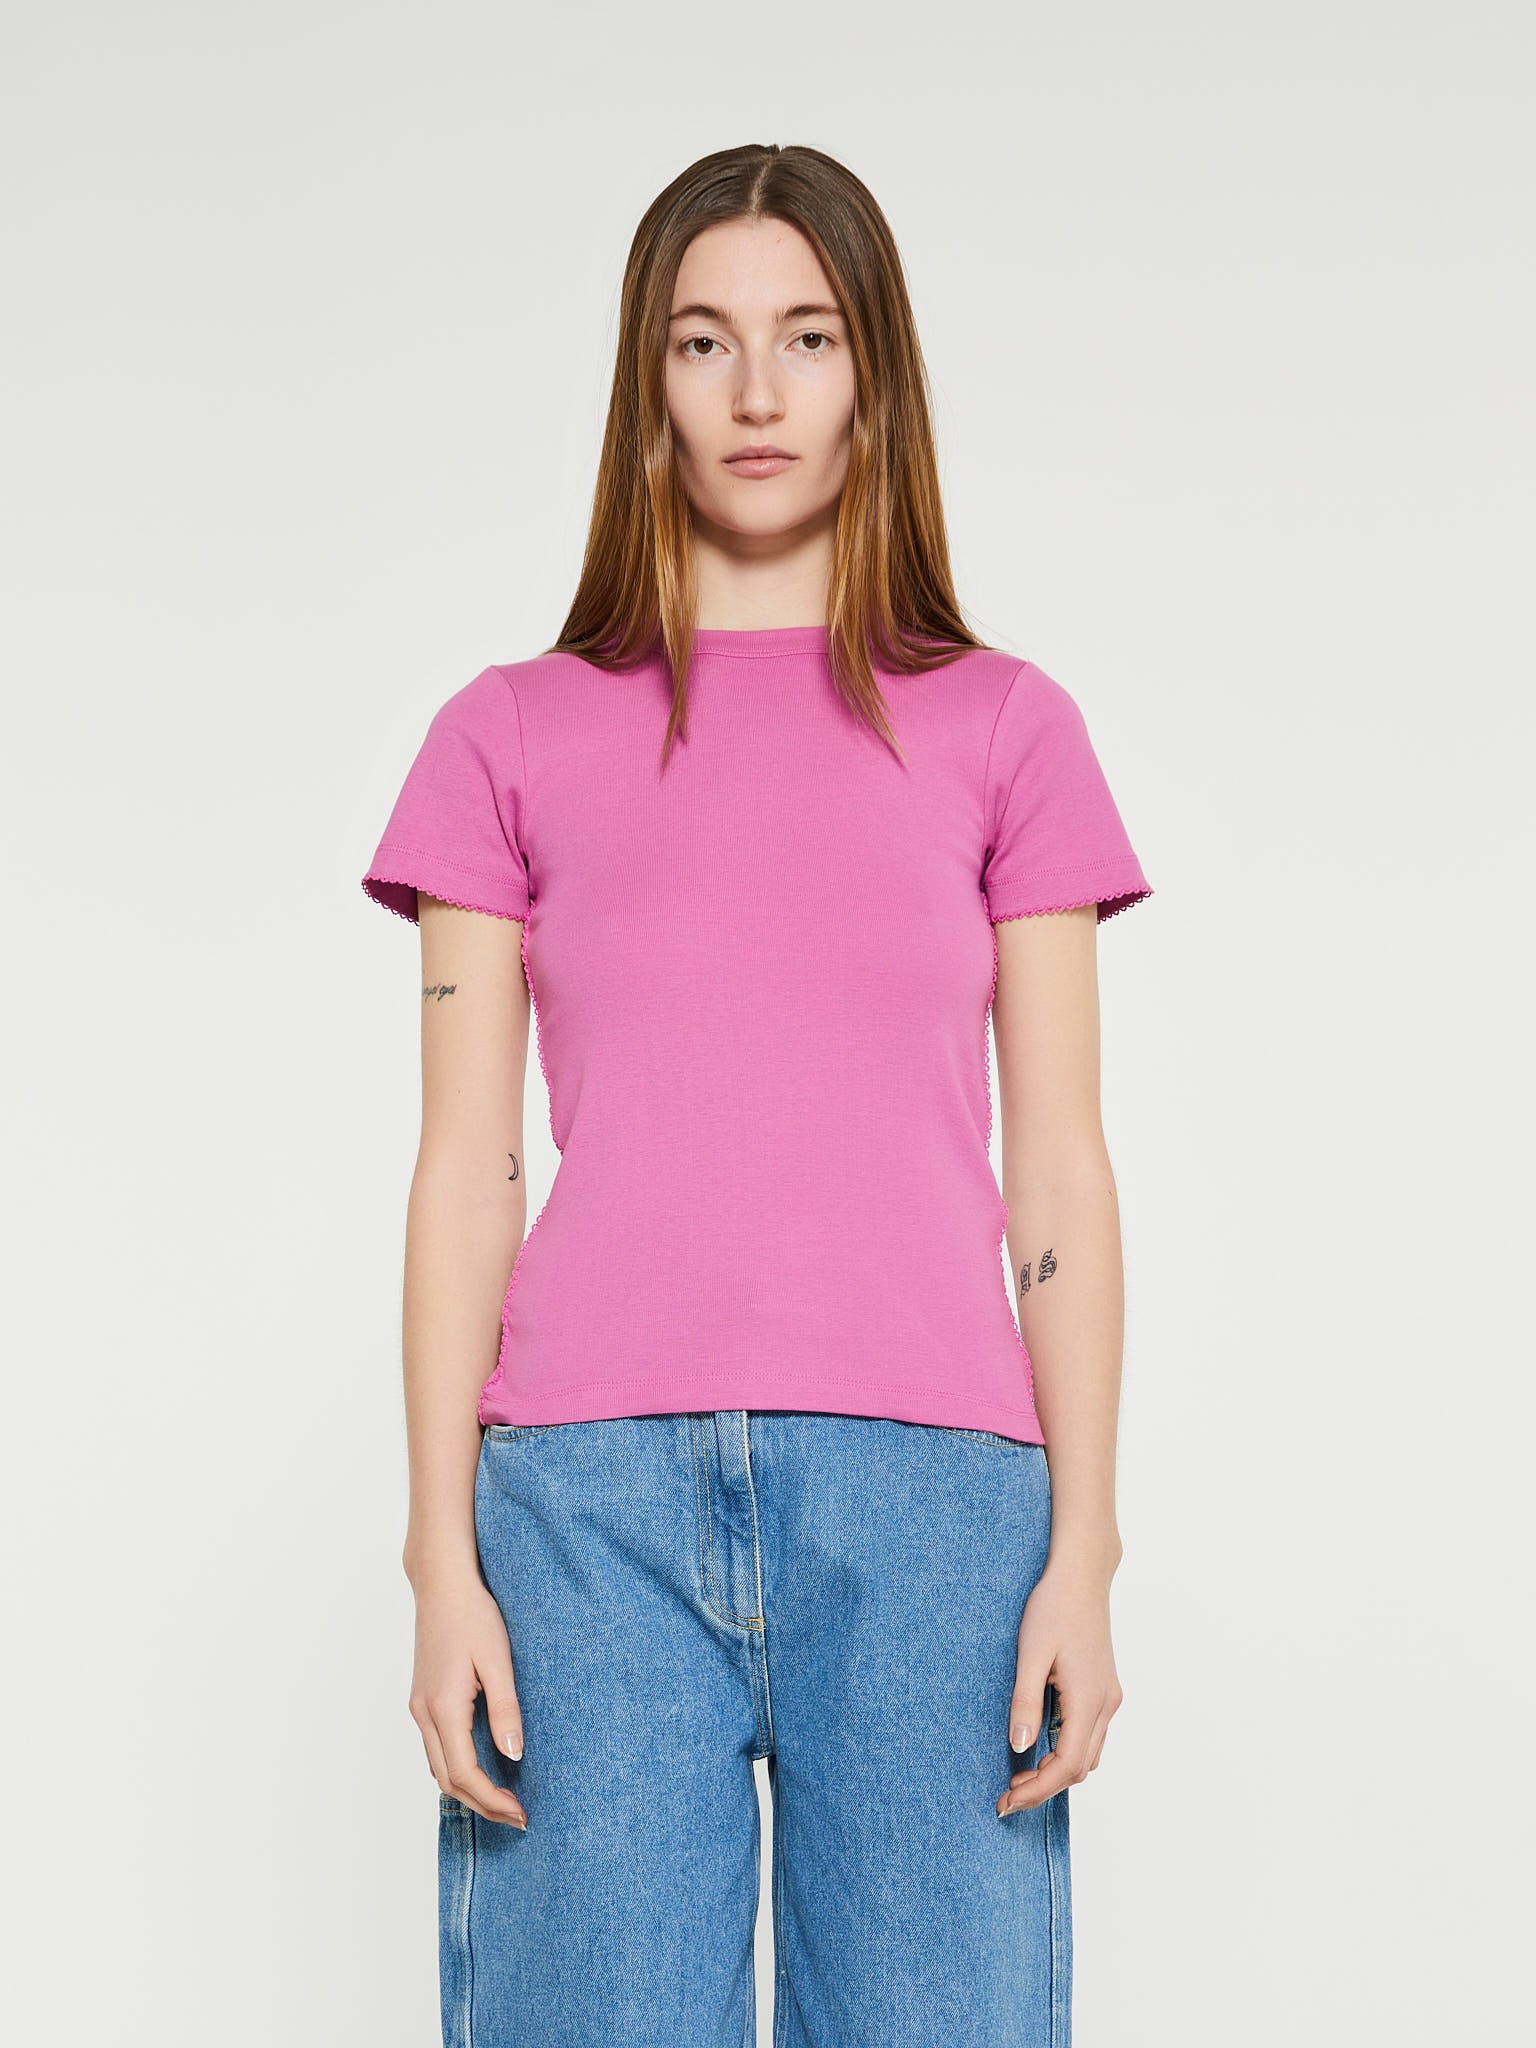 Uma T-Shirt in Orchid